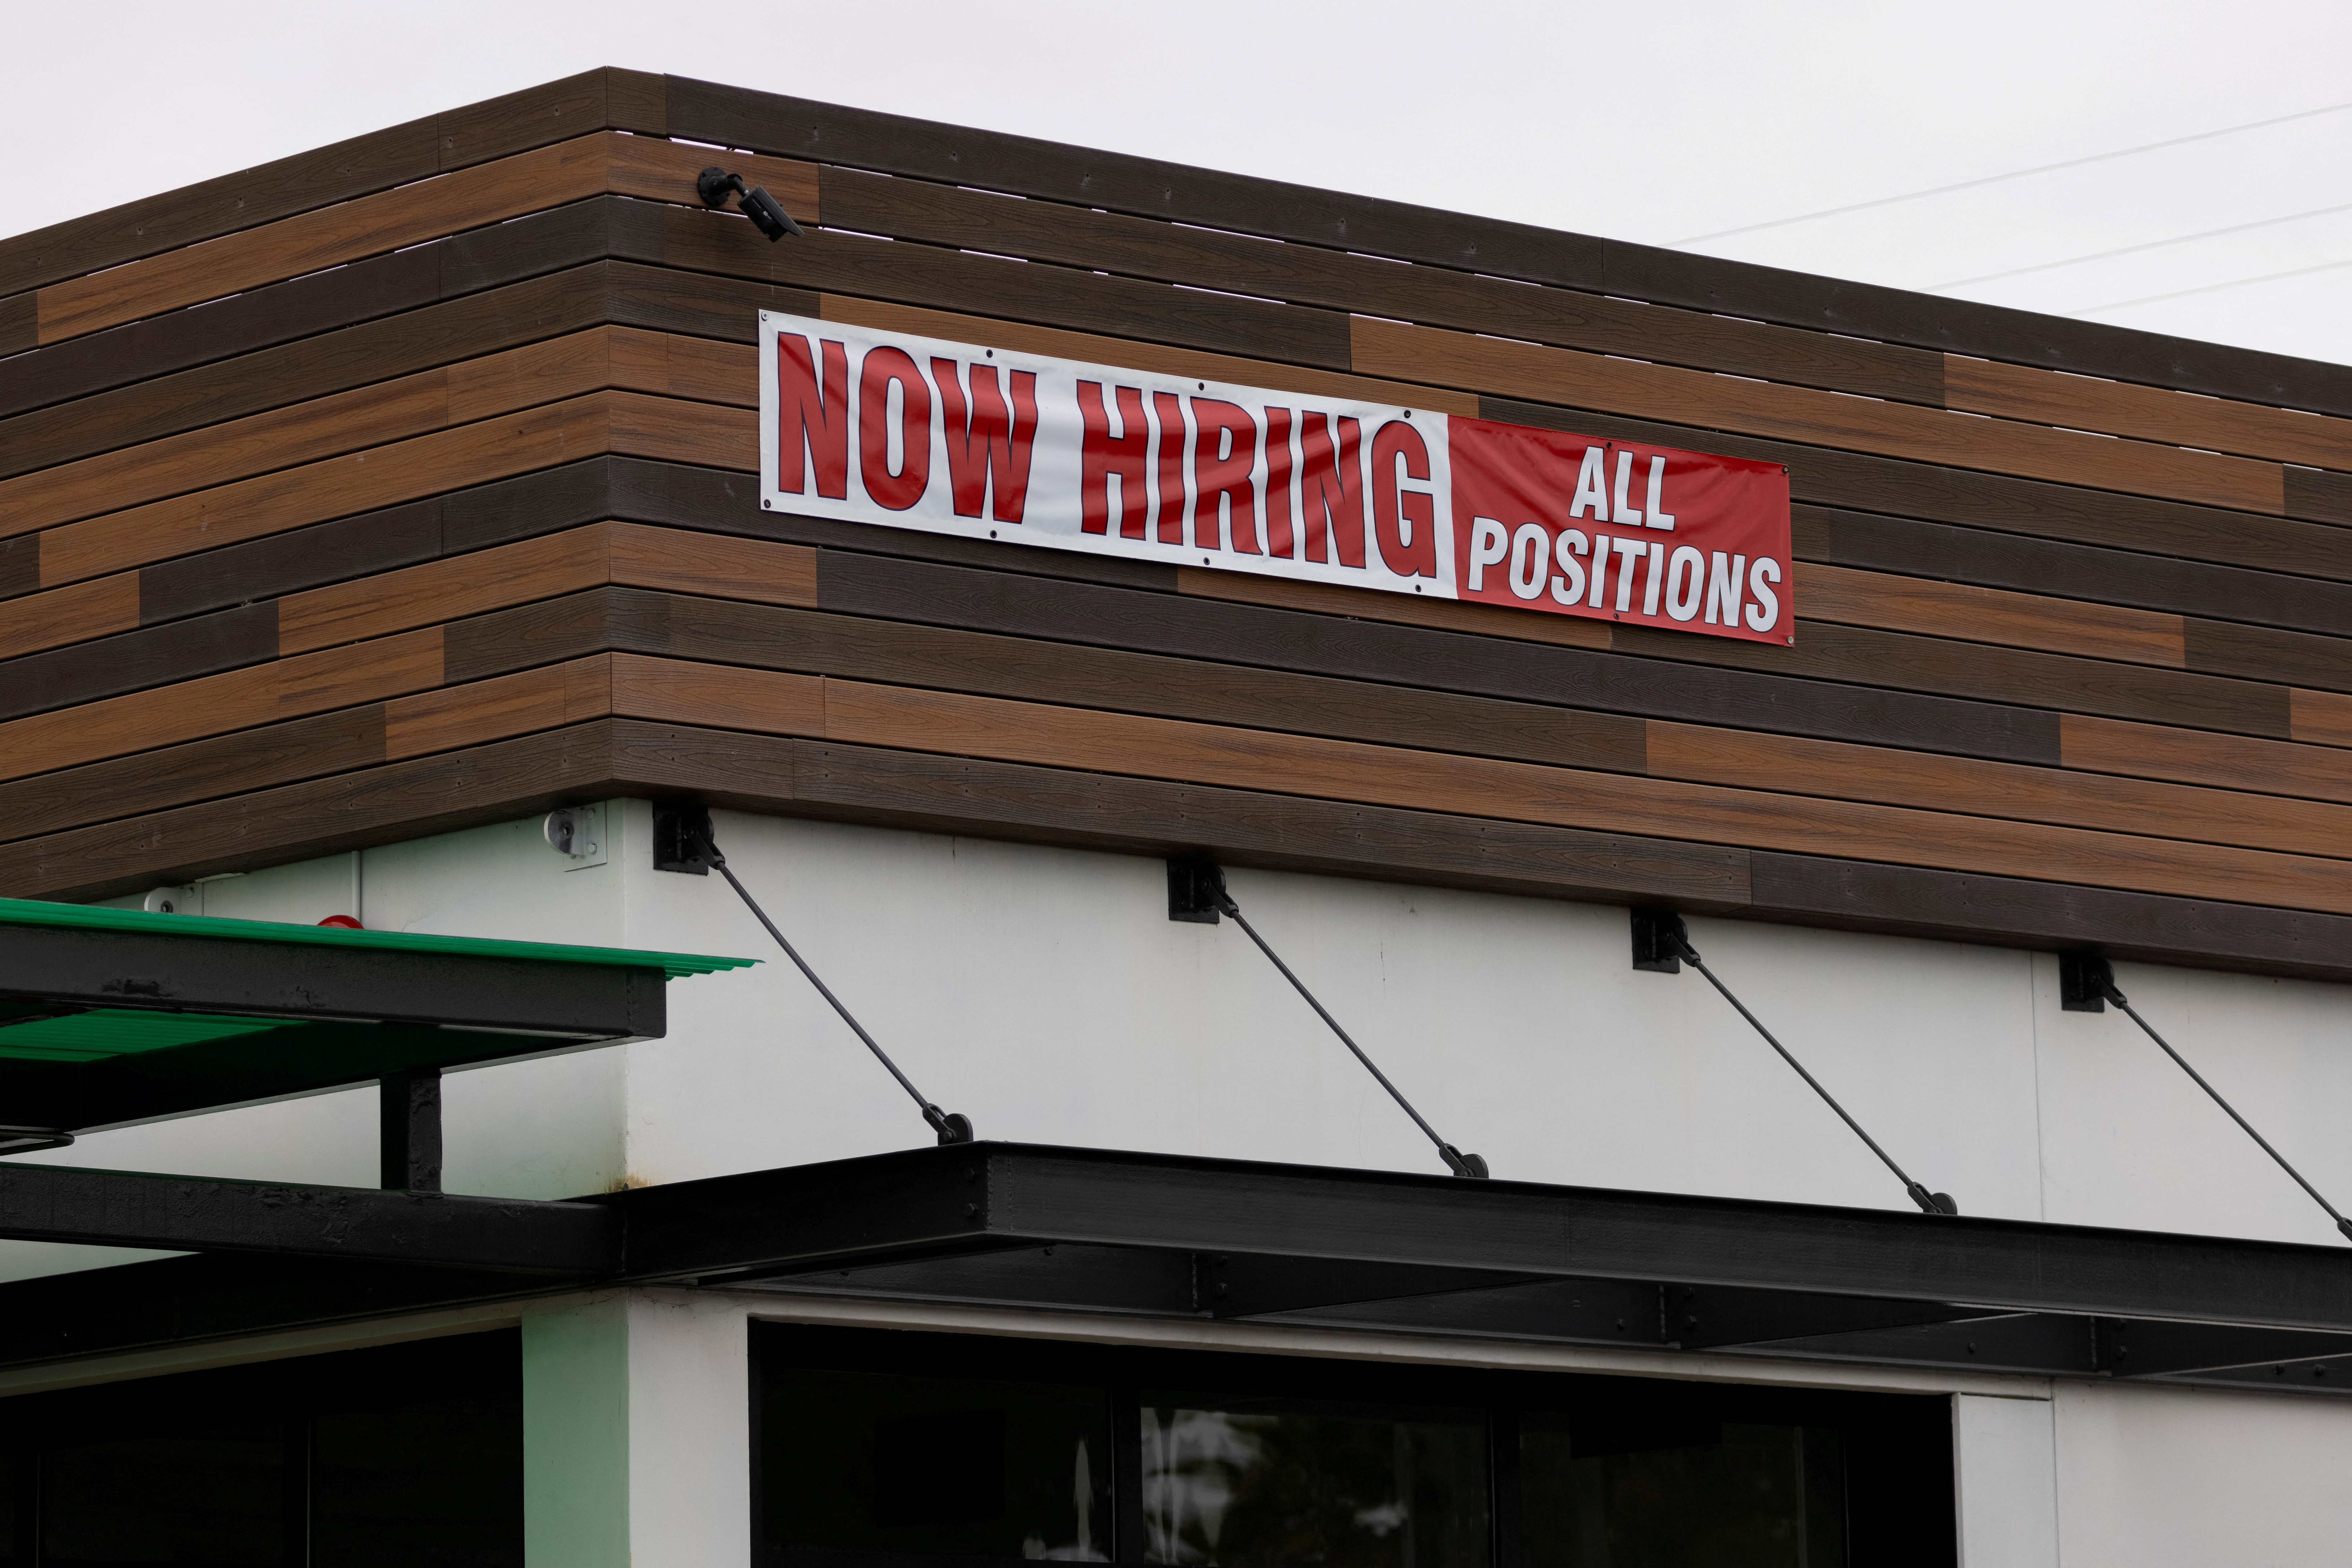 A restaurant advertising jobs looks to attract workers in Oceanside, California